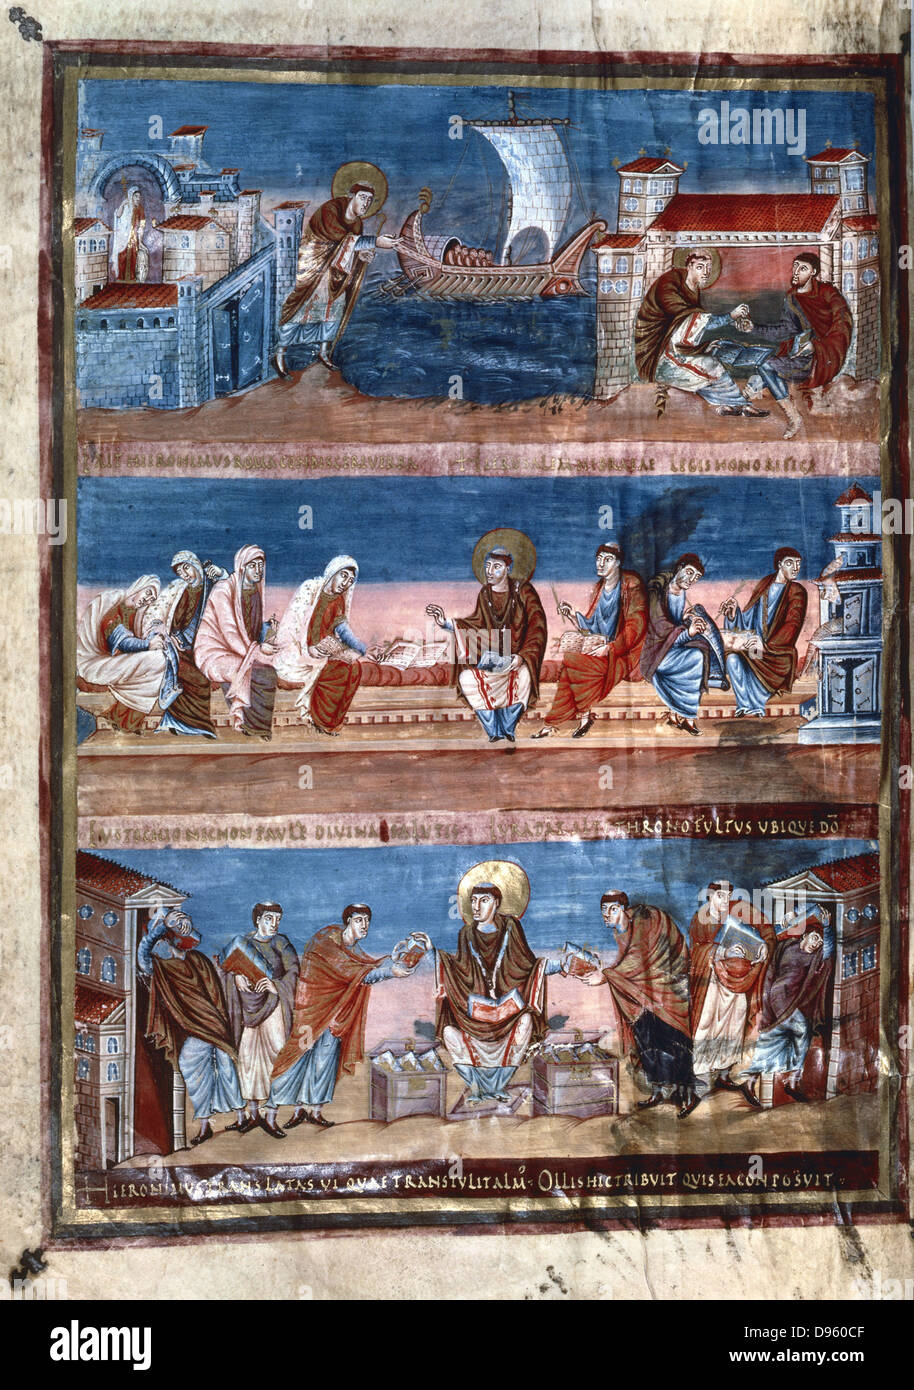 Bible of Charles the Bald (823-877).  Life of St Jerome. Top; leaves Rome for Jerusalem. Middle; In discussion with Saints Paul and Eustogine, behind is Saint Luke and two scribes. Bottom; Distributes copies of  his  translation of the Bible (The Vulgate) to monks.   9th century manuscript. Bibliotheque Nationale, Paris. Stock Photo